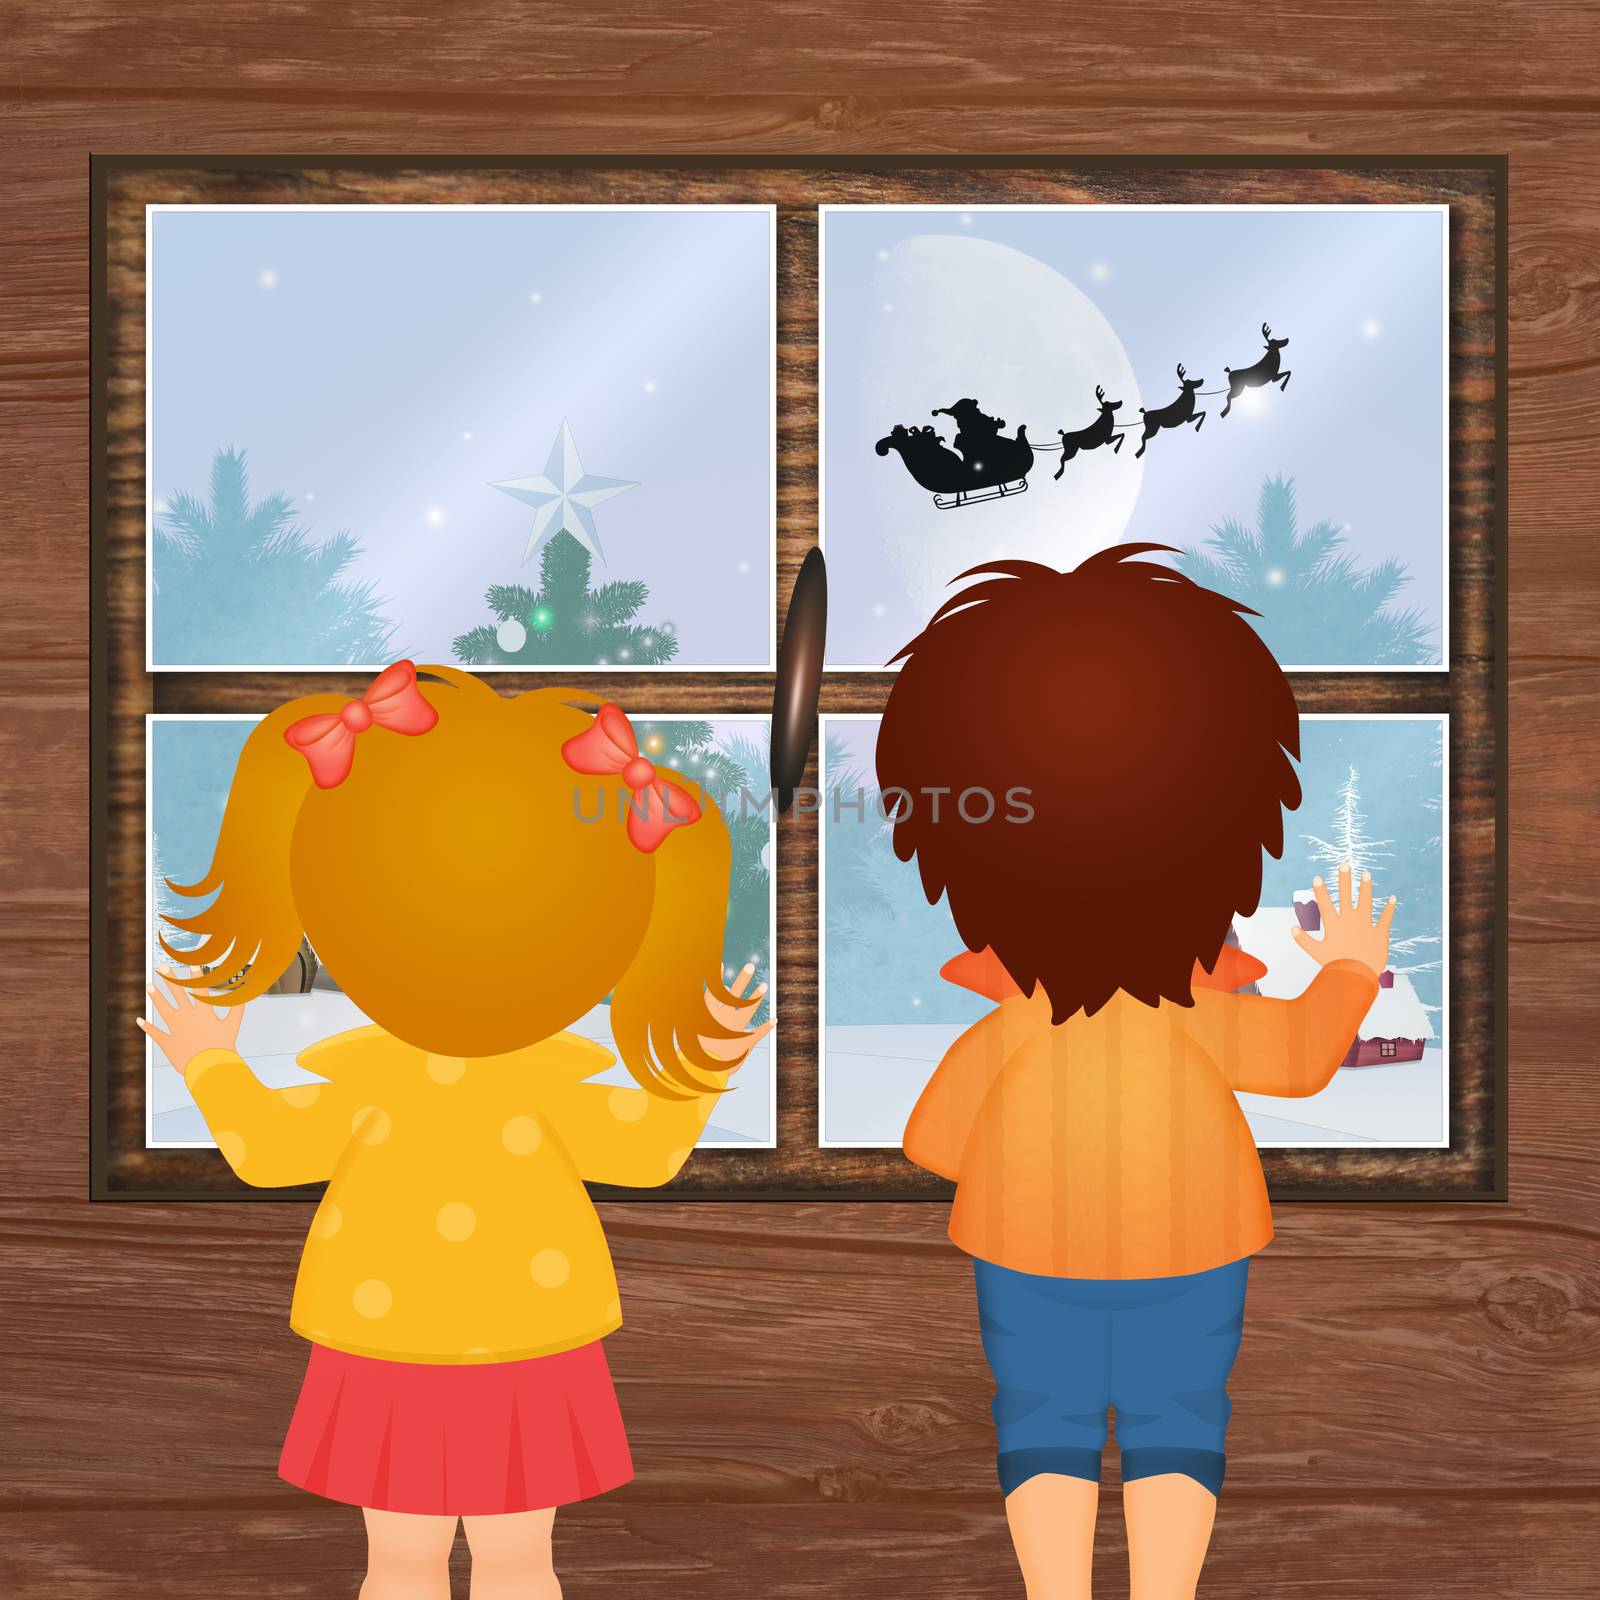 children looking at the window the sleigh of Santa Claus by adrenalina